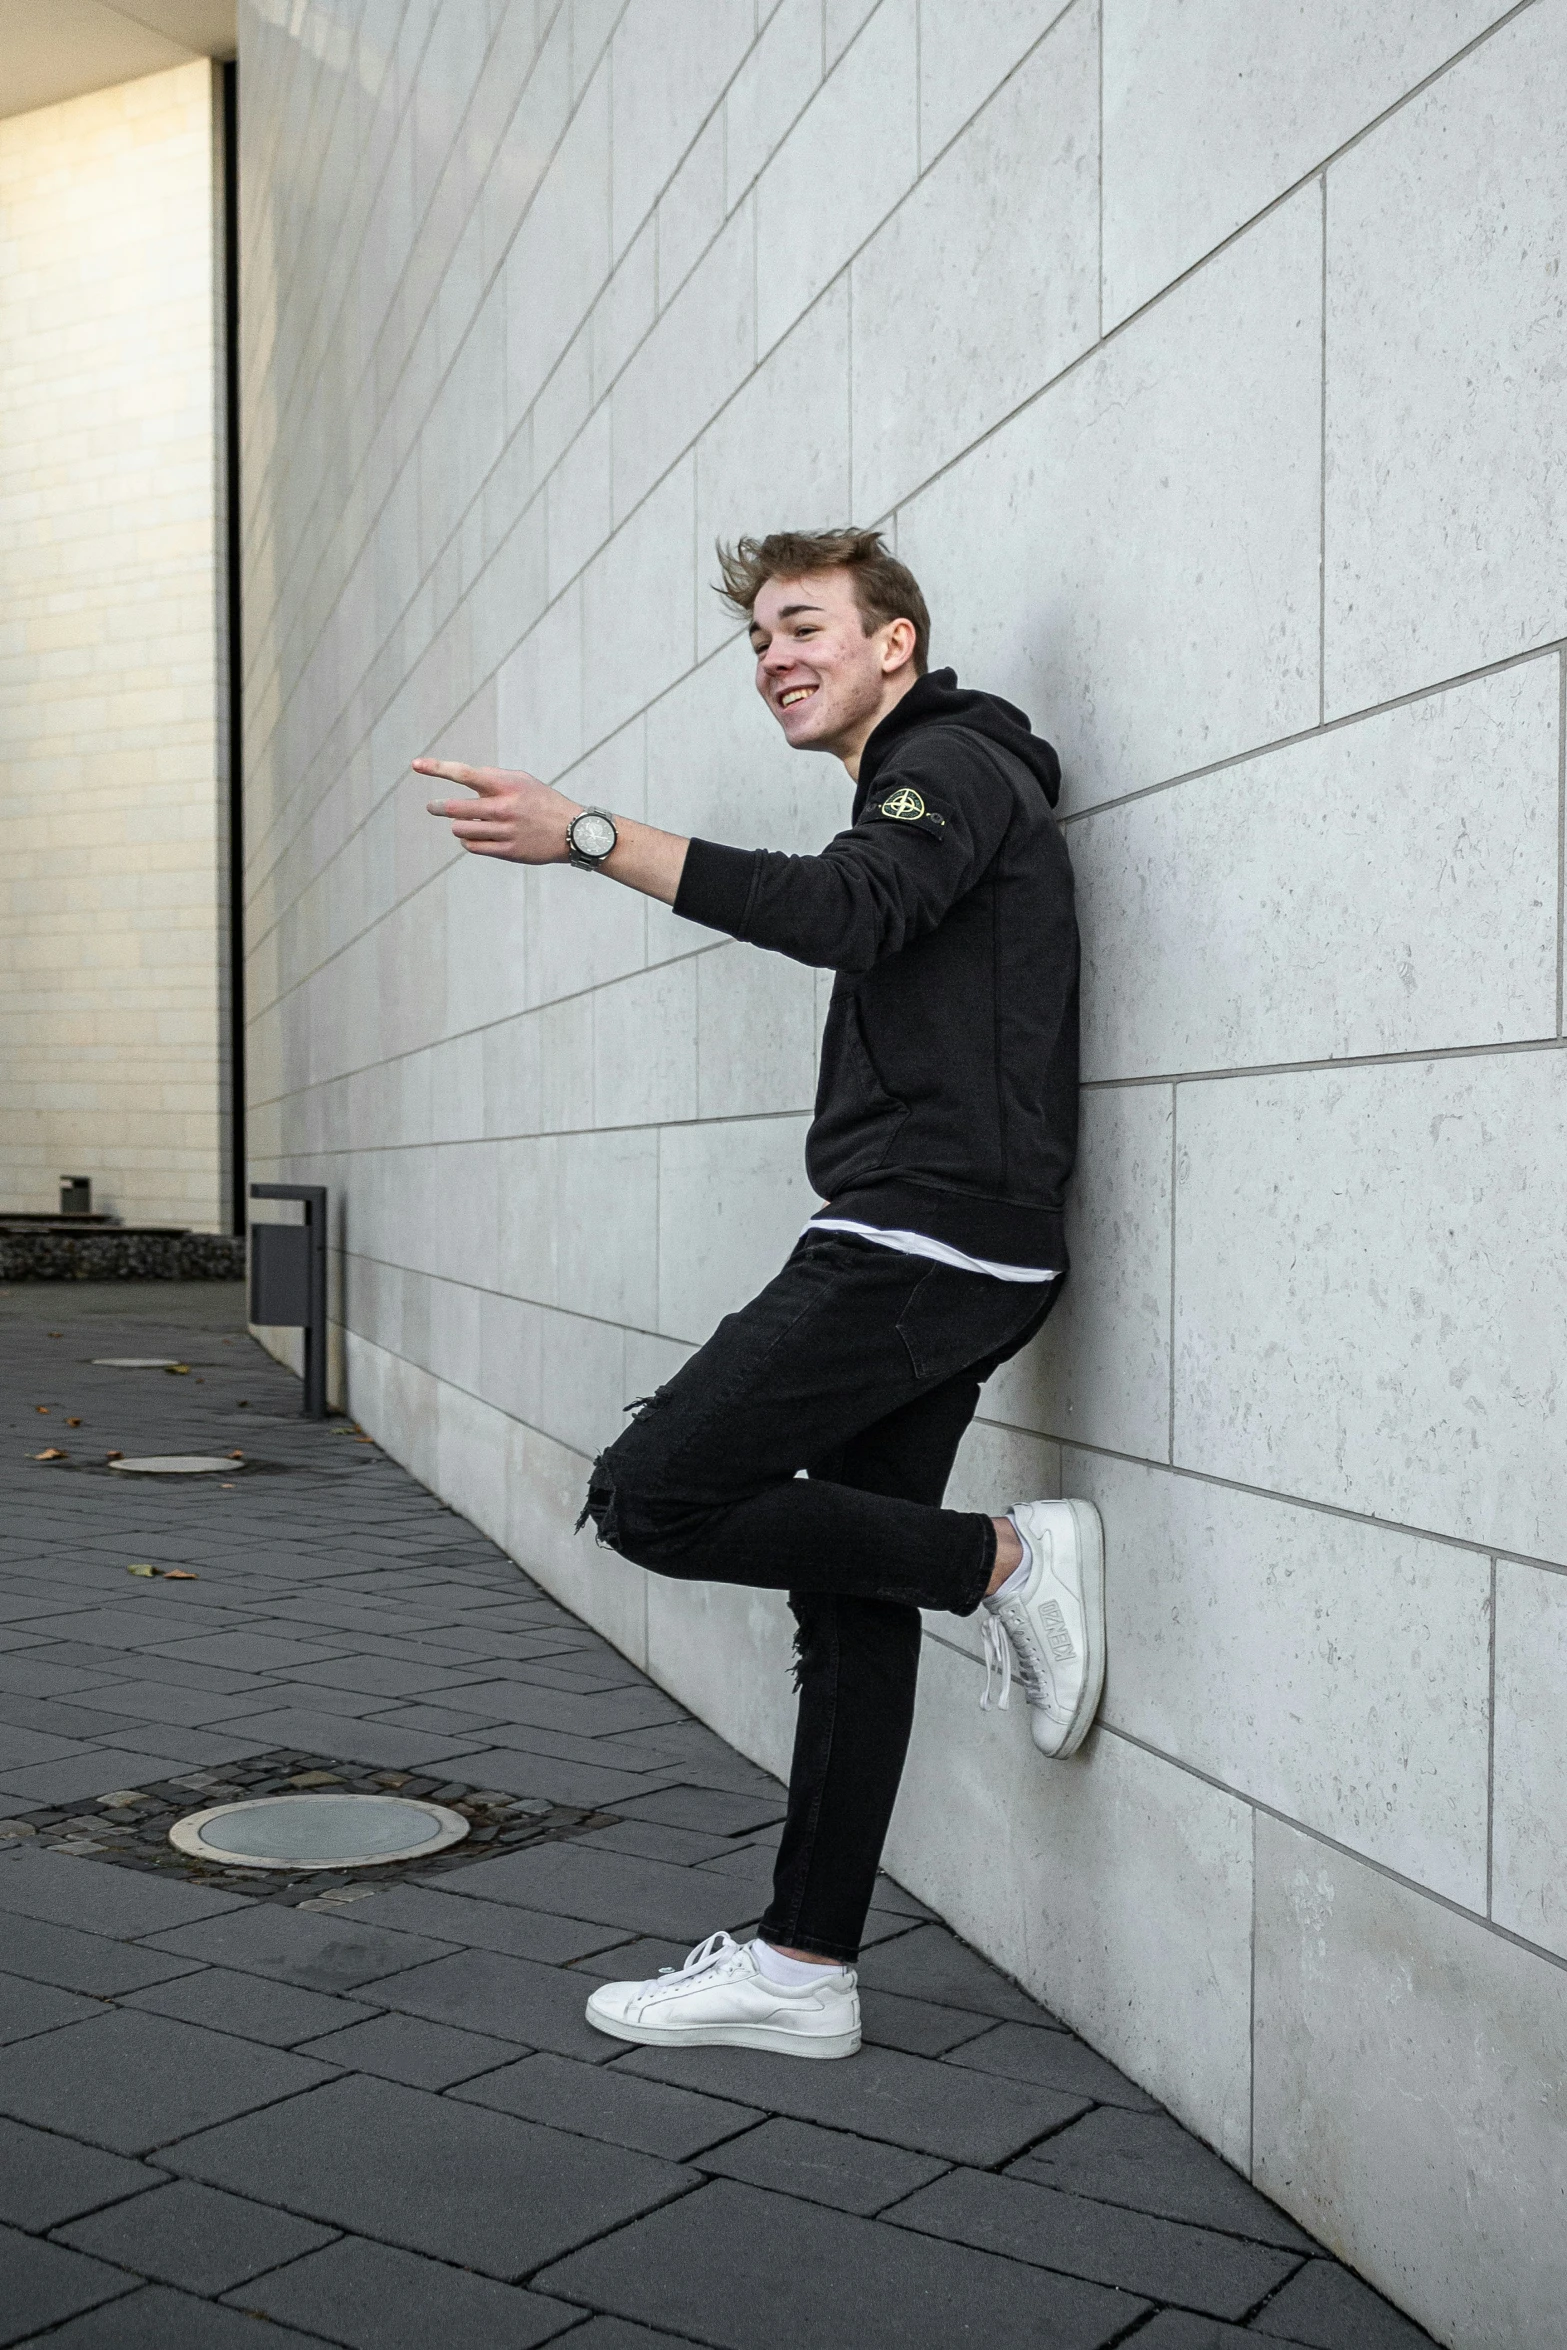 the young man in black is posing by a wall